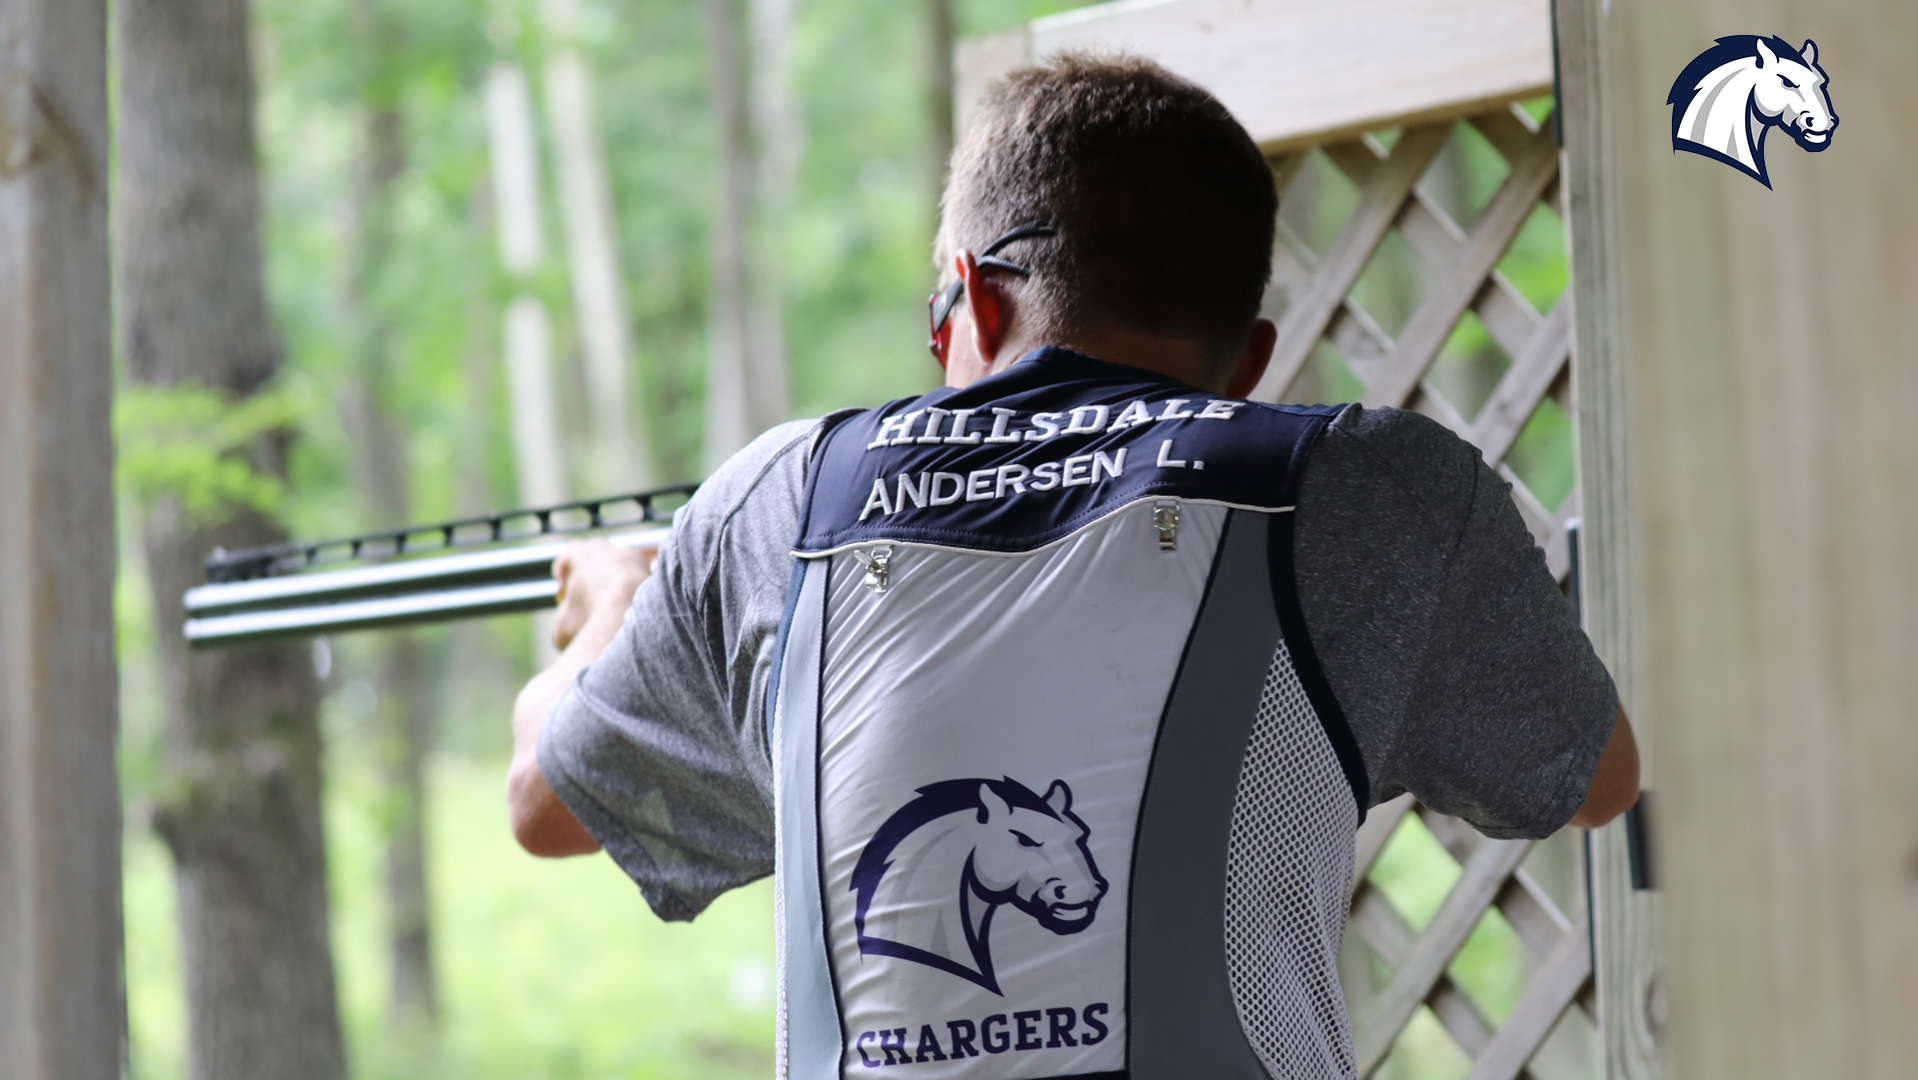 Chargers Shotgun athletes kick off year strong with duo of NSCA competitions